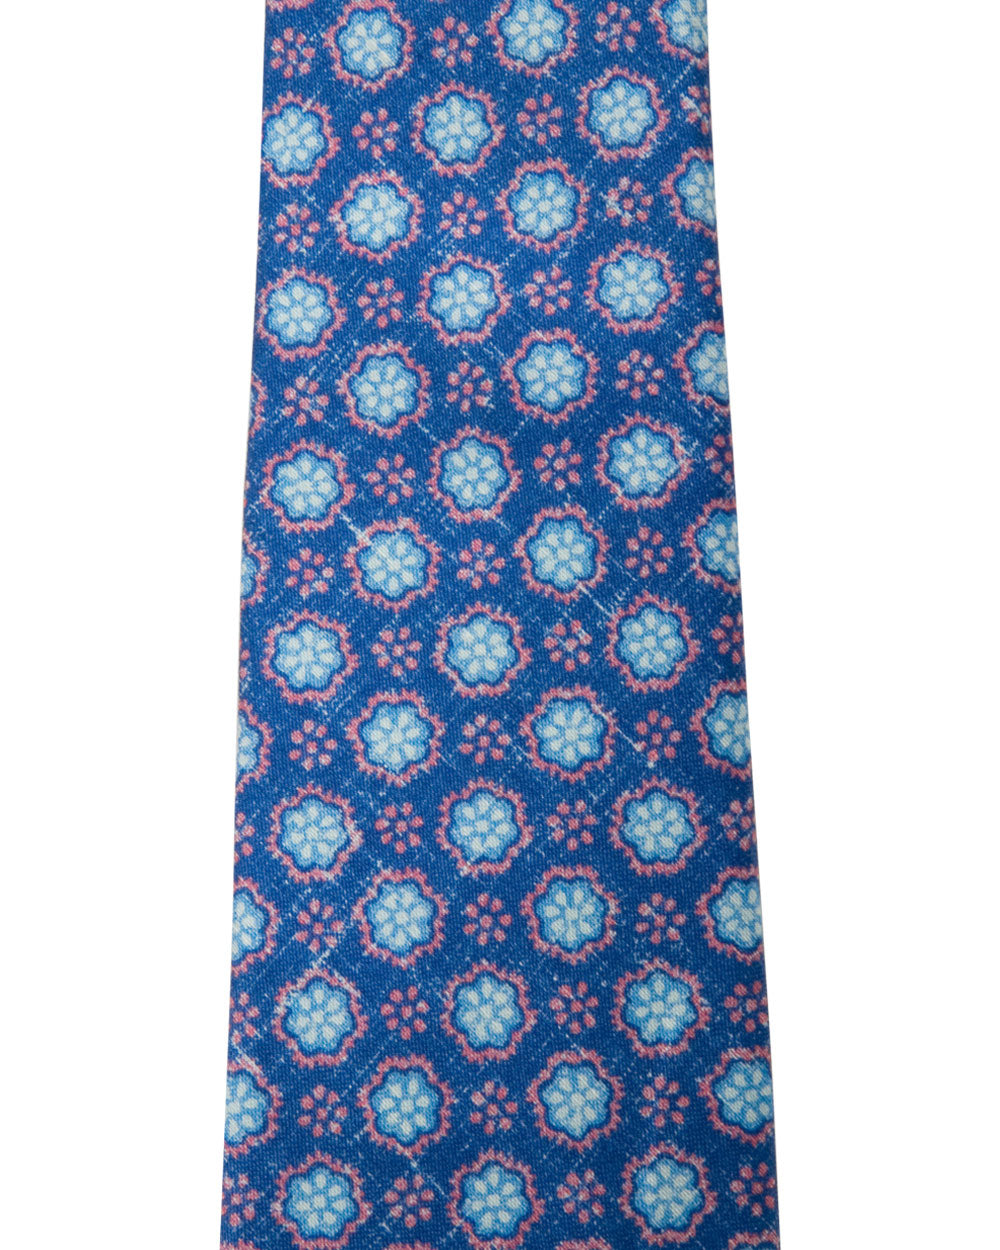 Blue and Pink Floral Tie